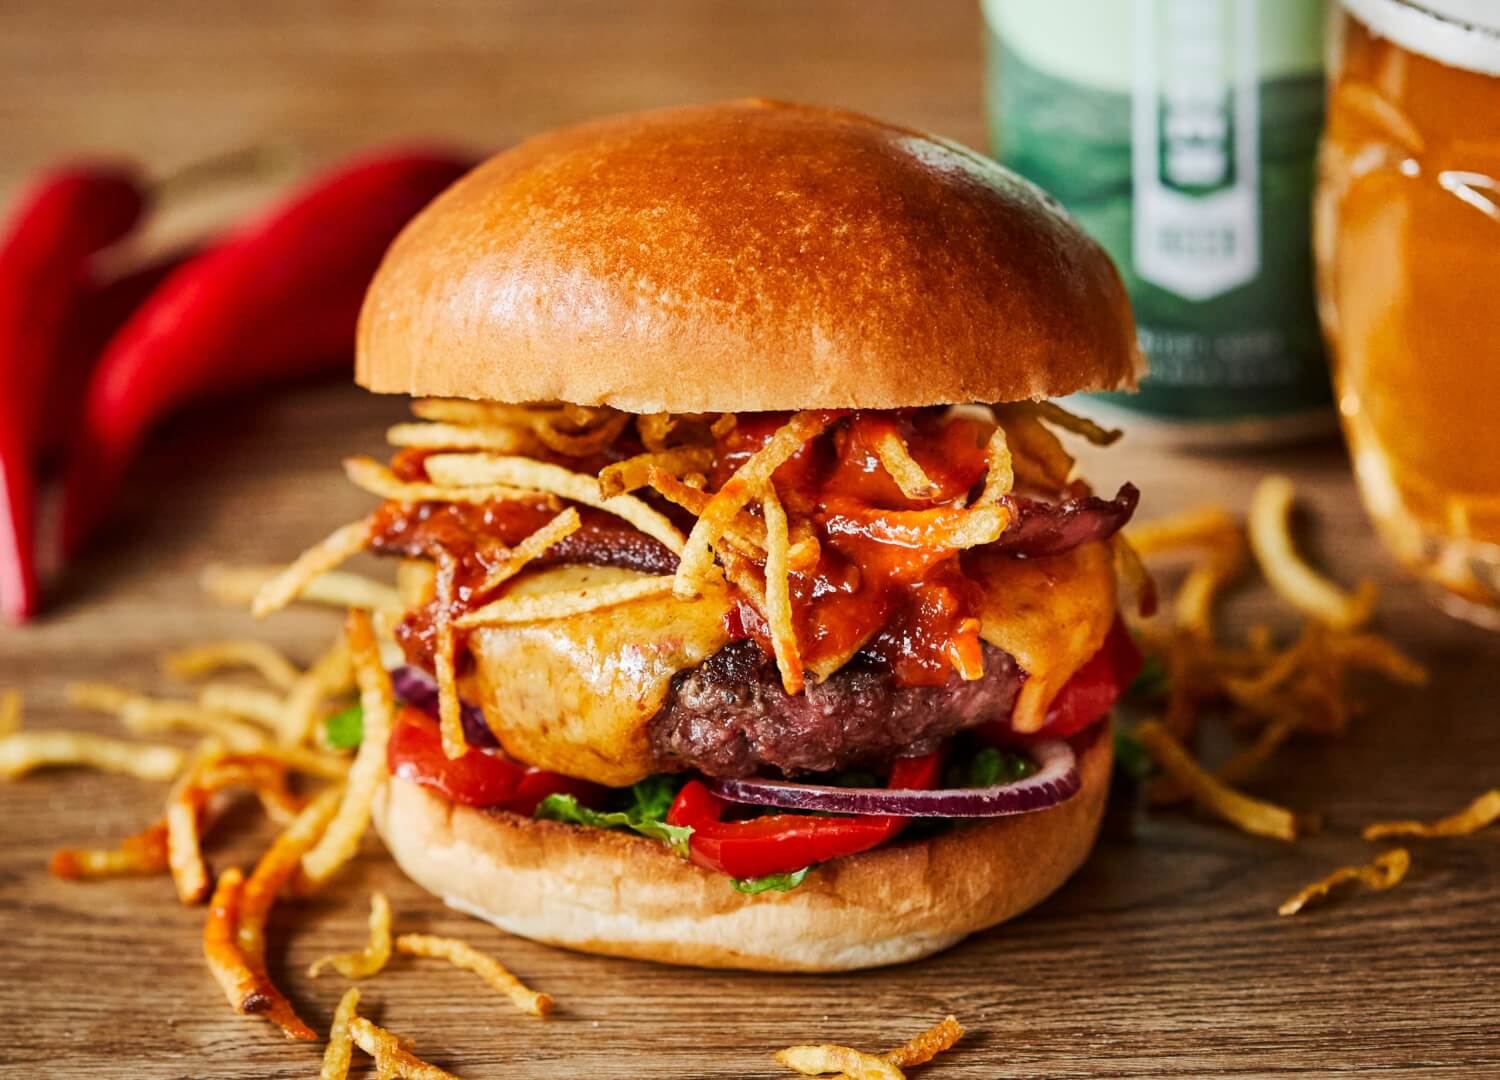 chilli-beef-burger-with-bacon-chilli-cheese-hot-sauce-with-chips